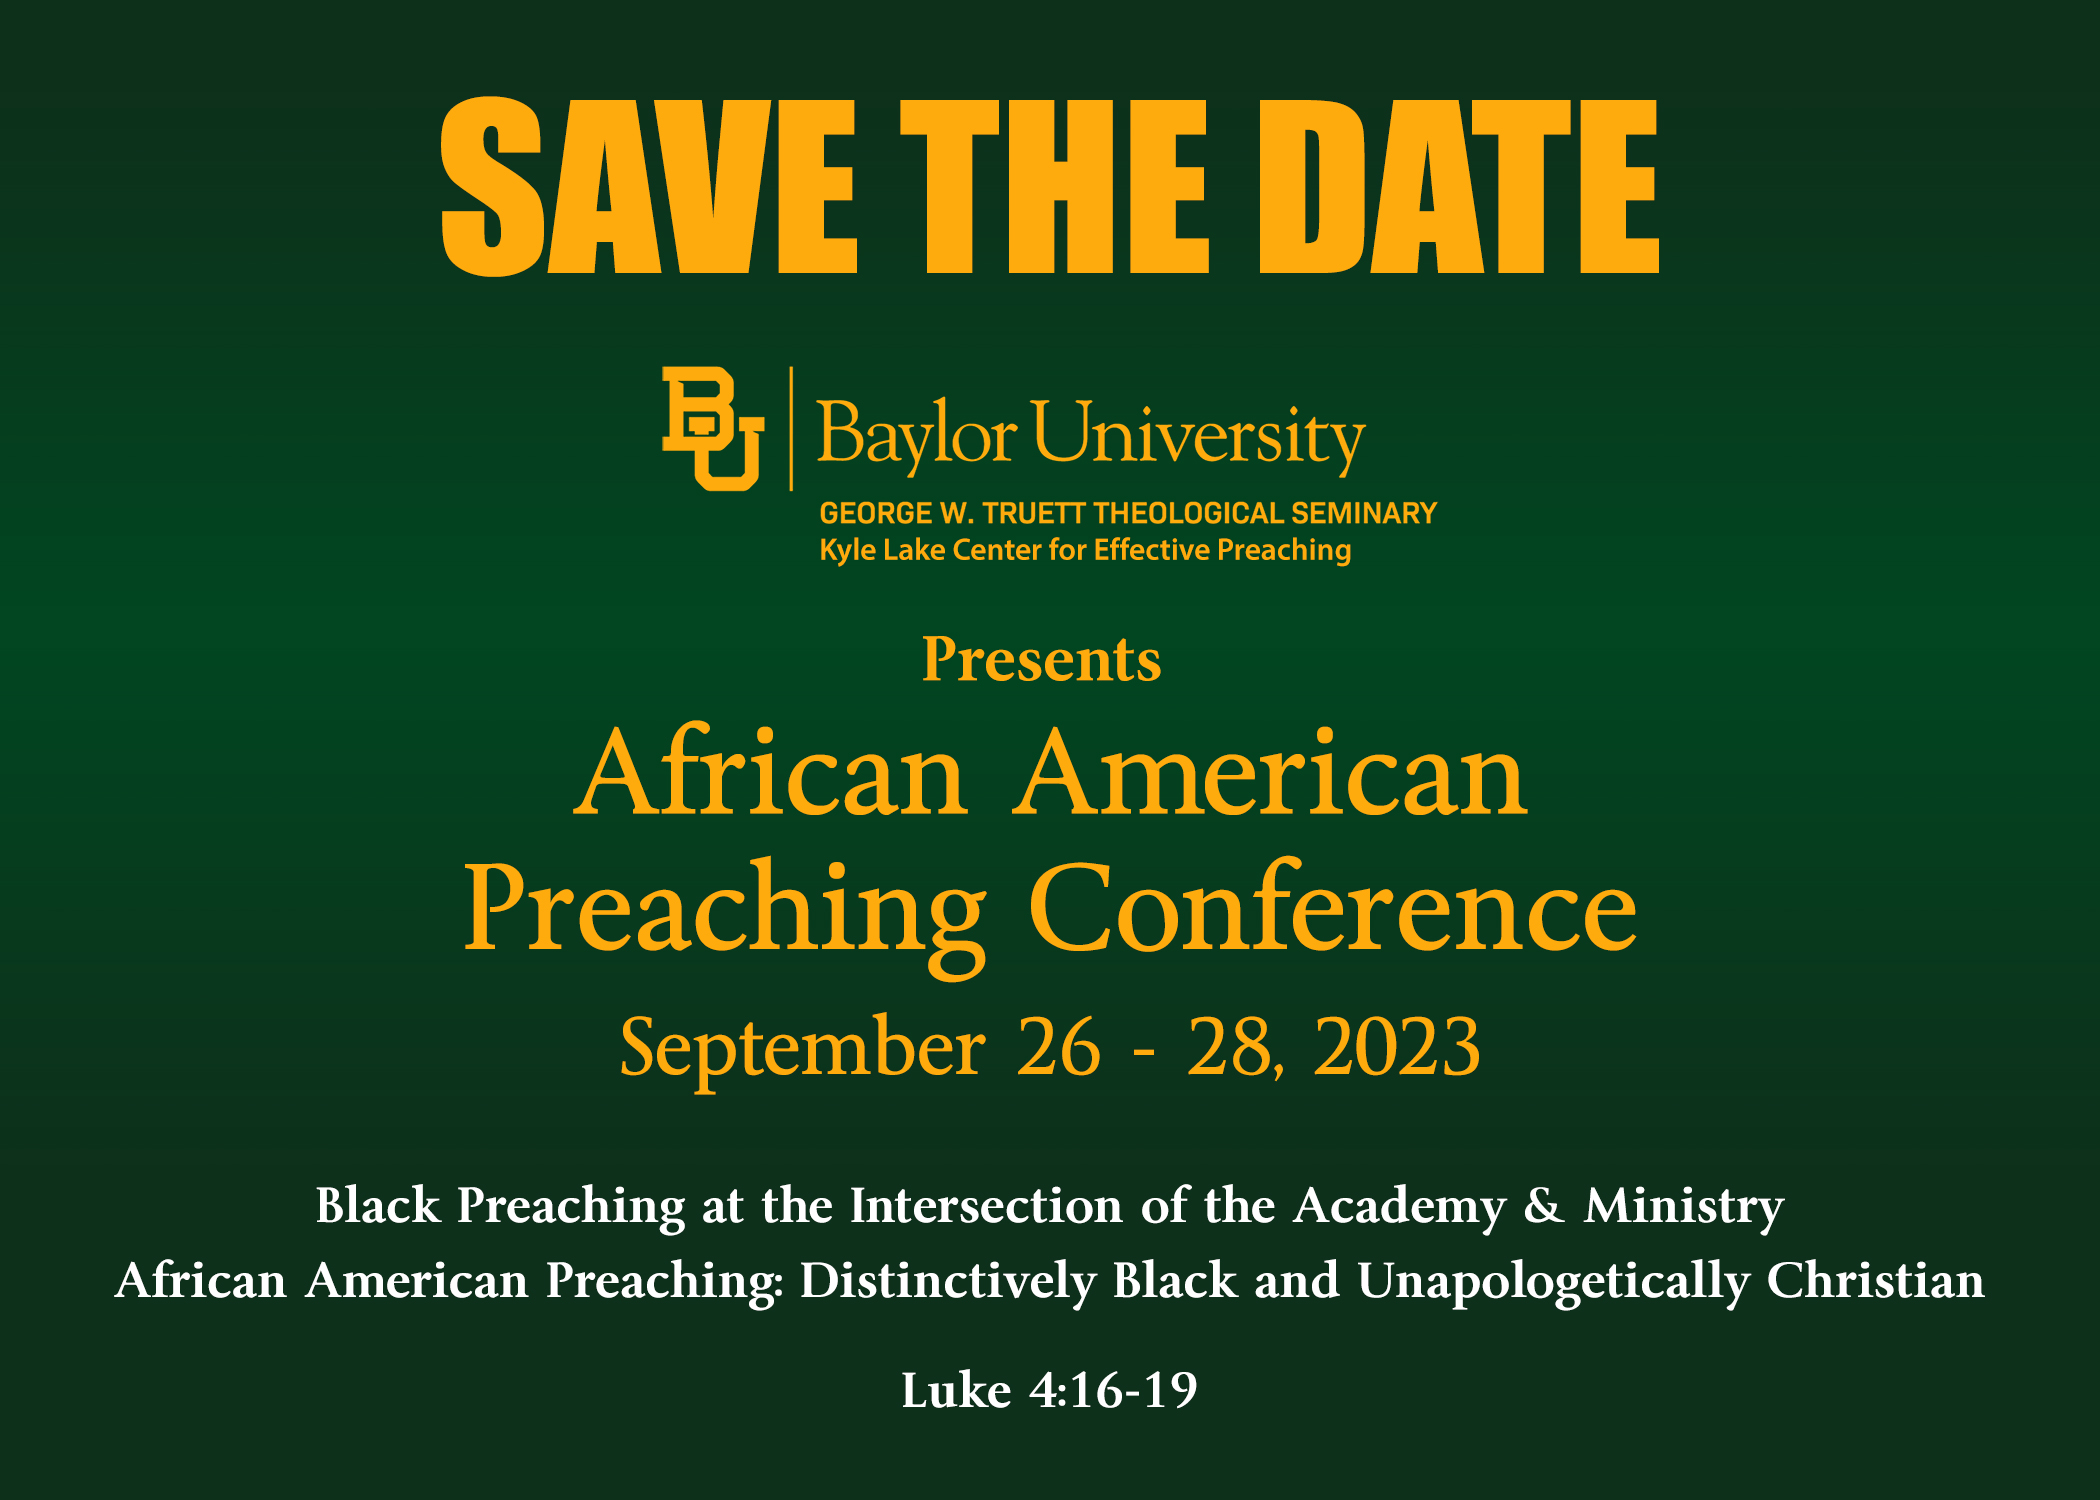 African American Preaching Conference W. Truett Theological